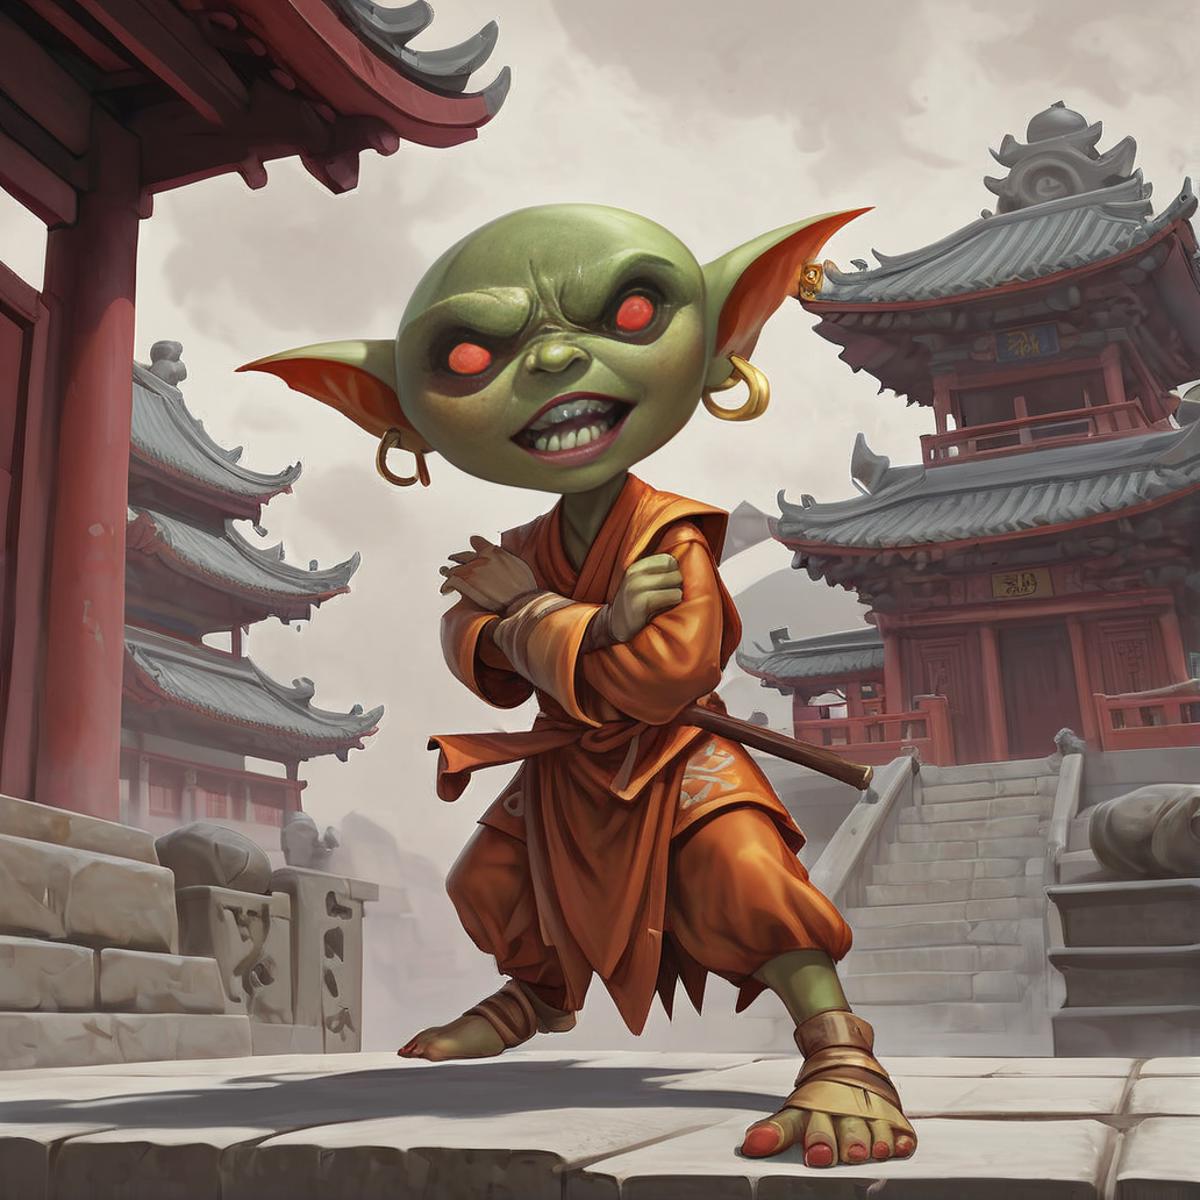 Pathfinder goblin image by Xhad